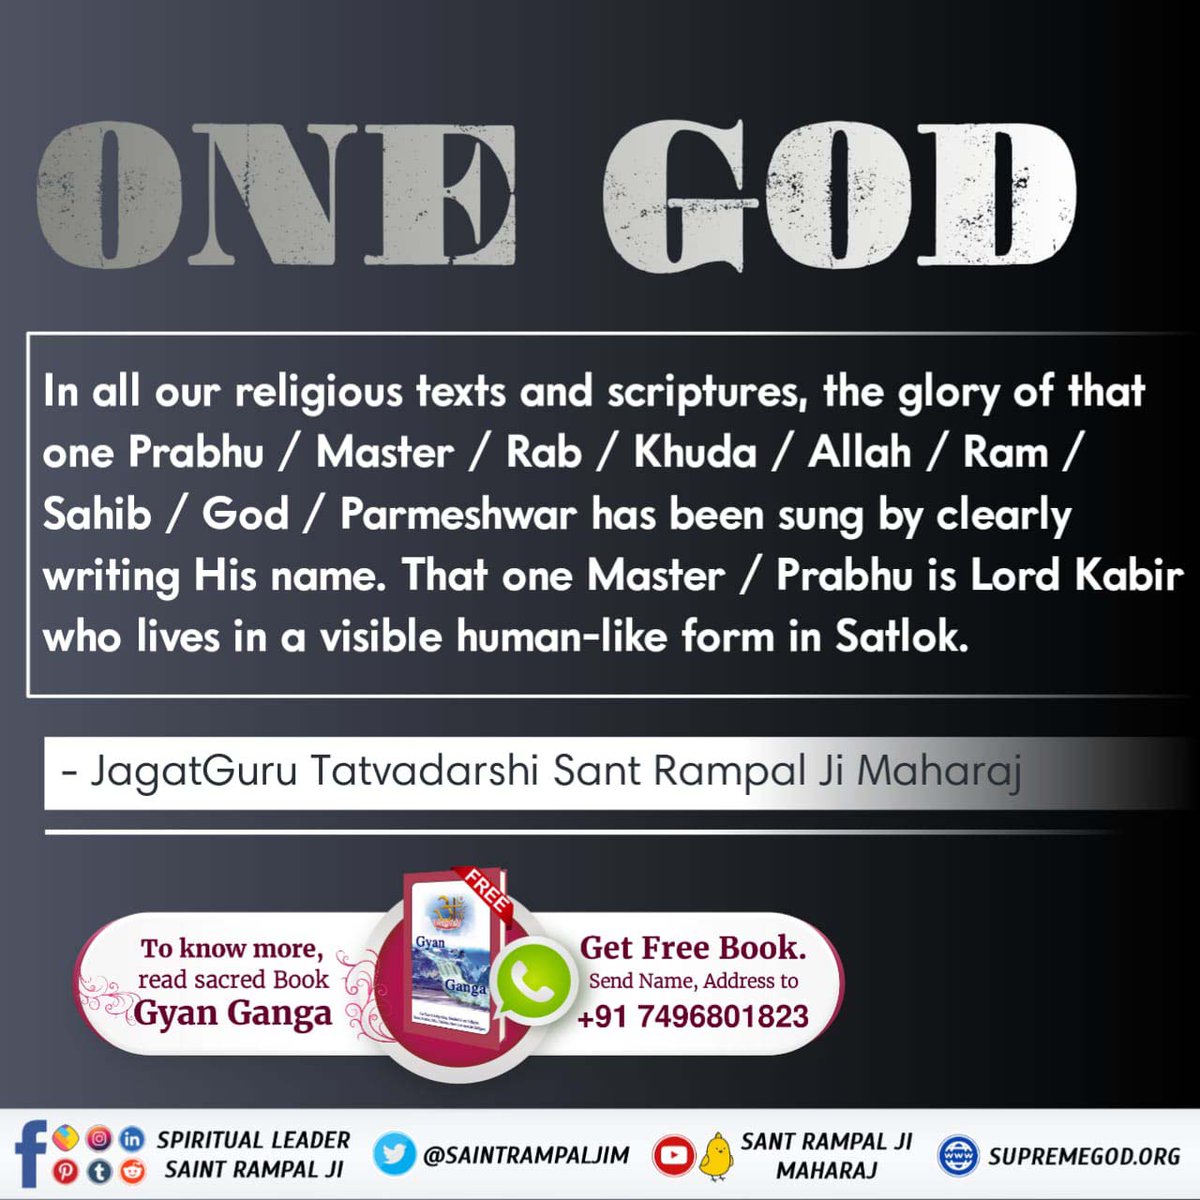 @Jaanu_Dasi 'Saint Rampal Ji Maharaj is the only Real Saint who has set straight the tangled path of worship, by letting us know the complete details about scripture-based worship.FOR MORE INFORMATION DOWNLOAD 🌼 *Sant Rampal Ji Maharaj App*
पूर्ण संत रामपाल जी